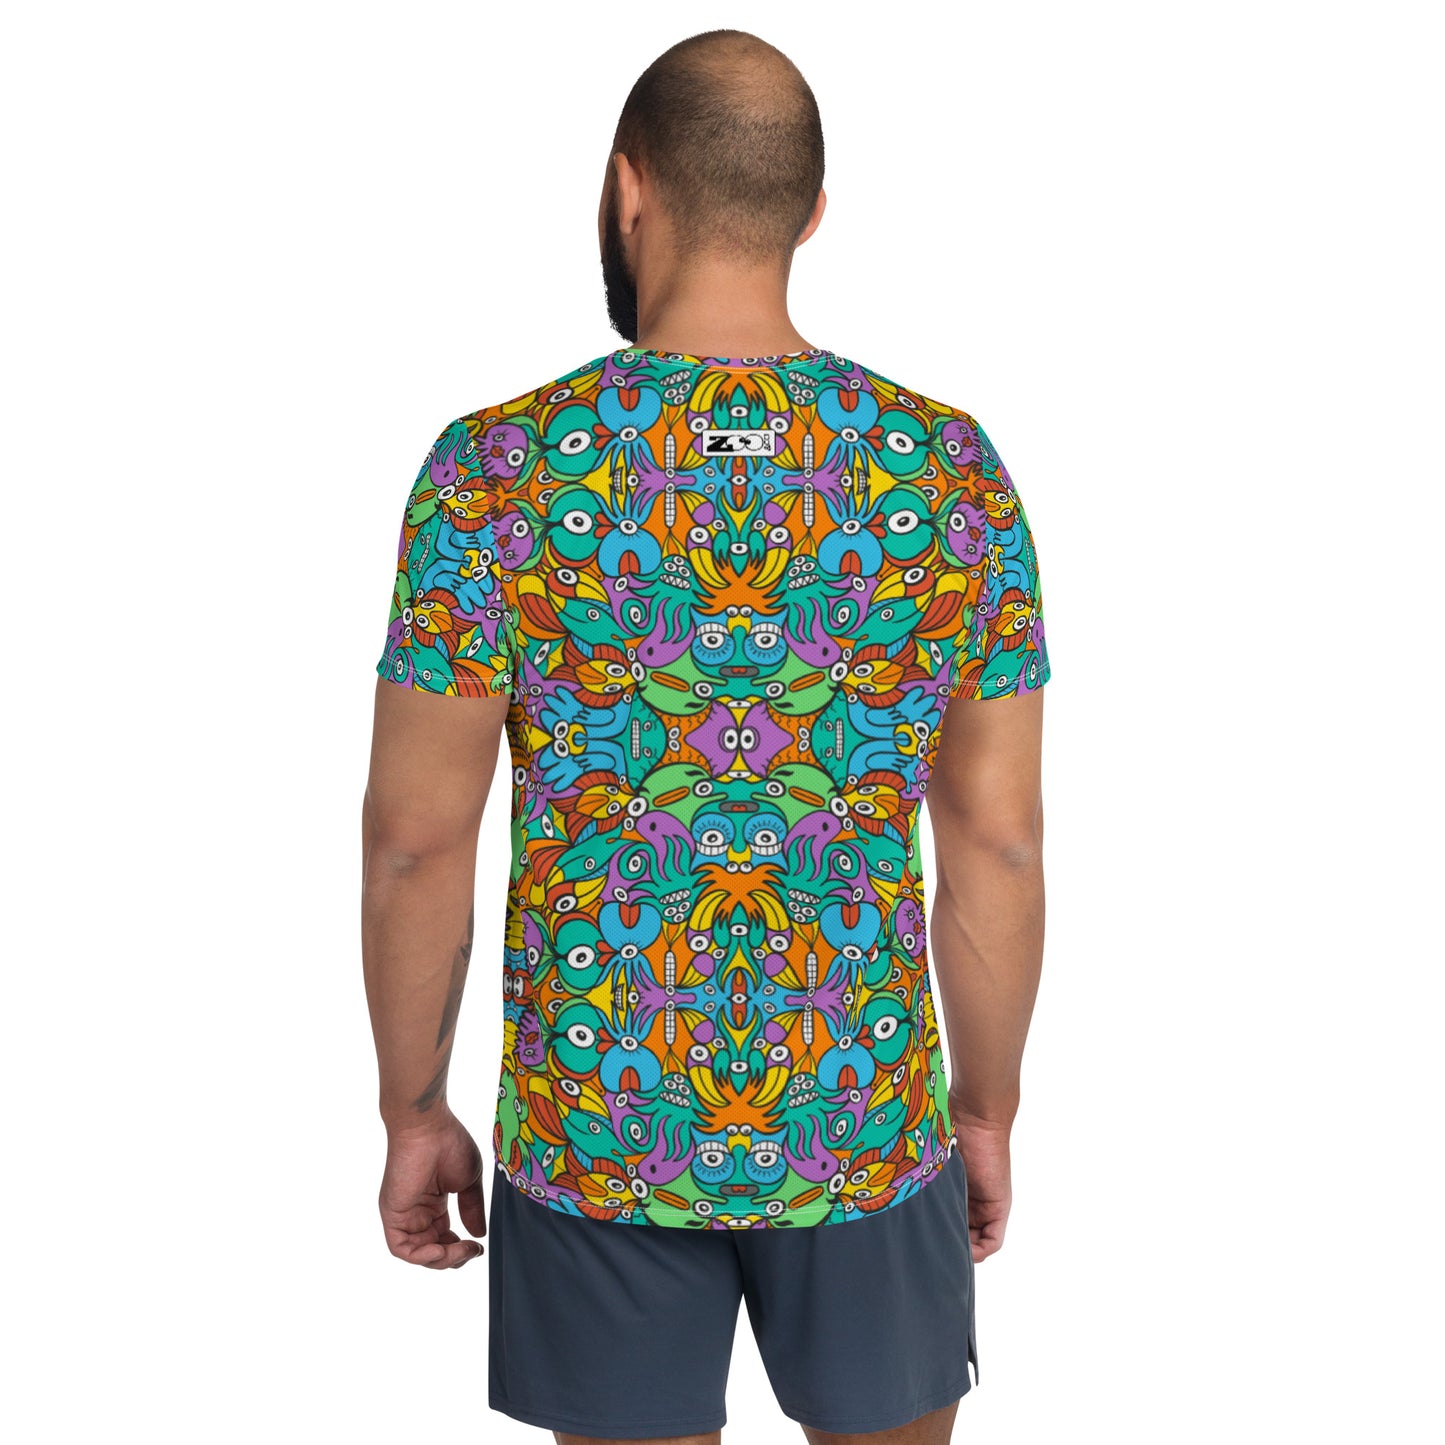 Fantastic doodle world full of weird creatures All-Over Print Men's Athletic T-shirt. Back view